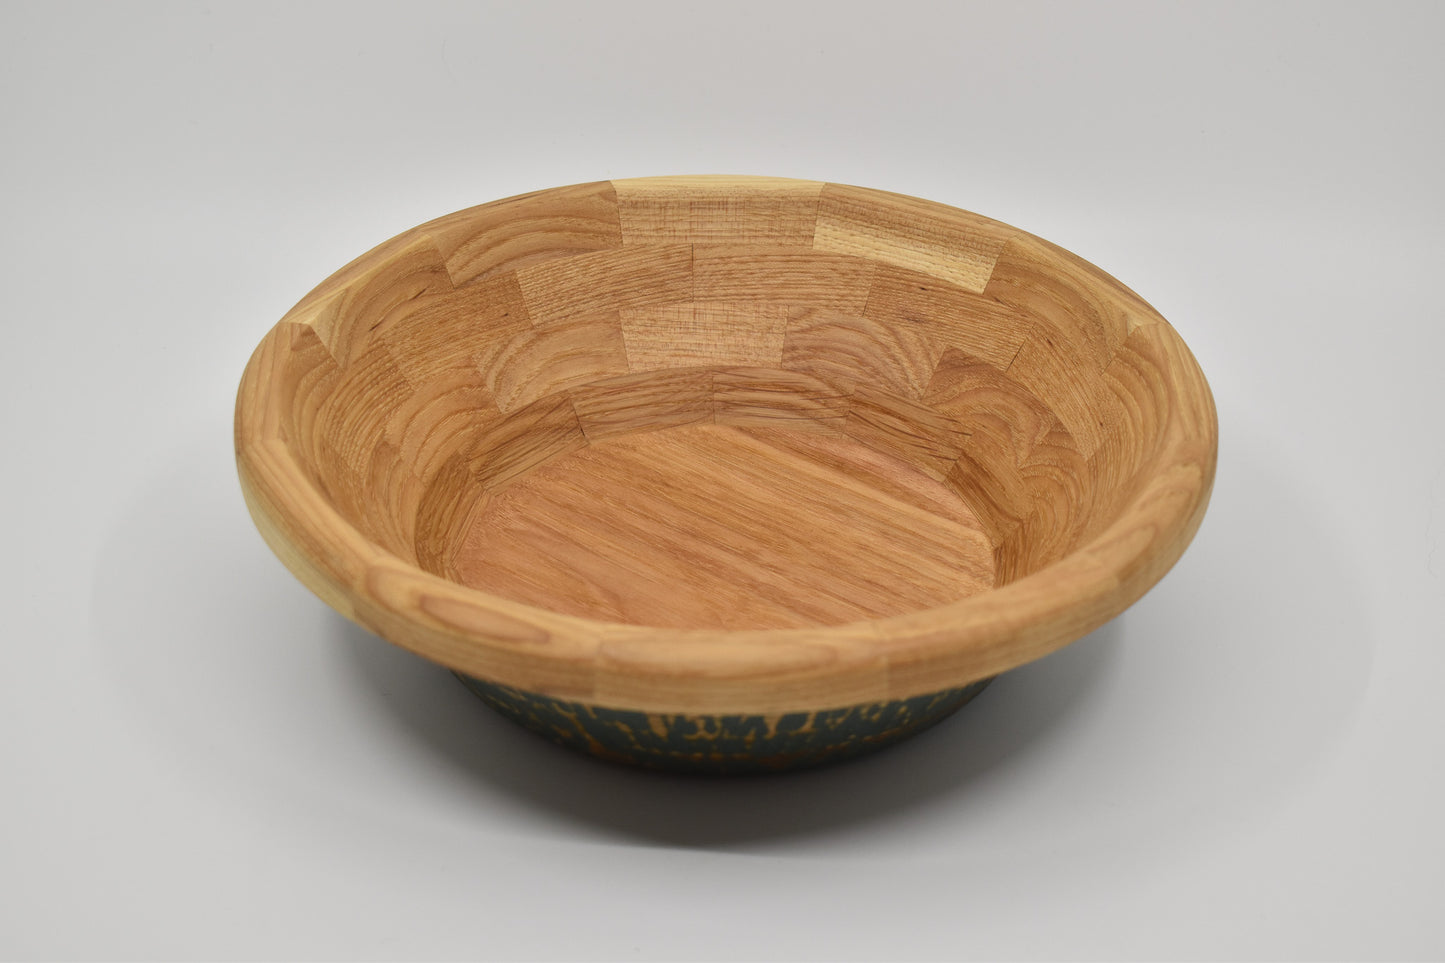 Hickory Bowl with Carved Texture